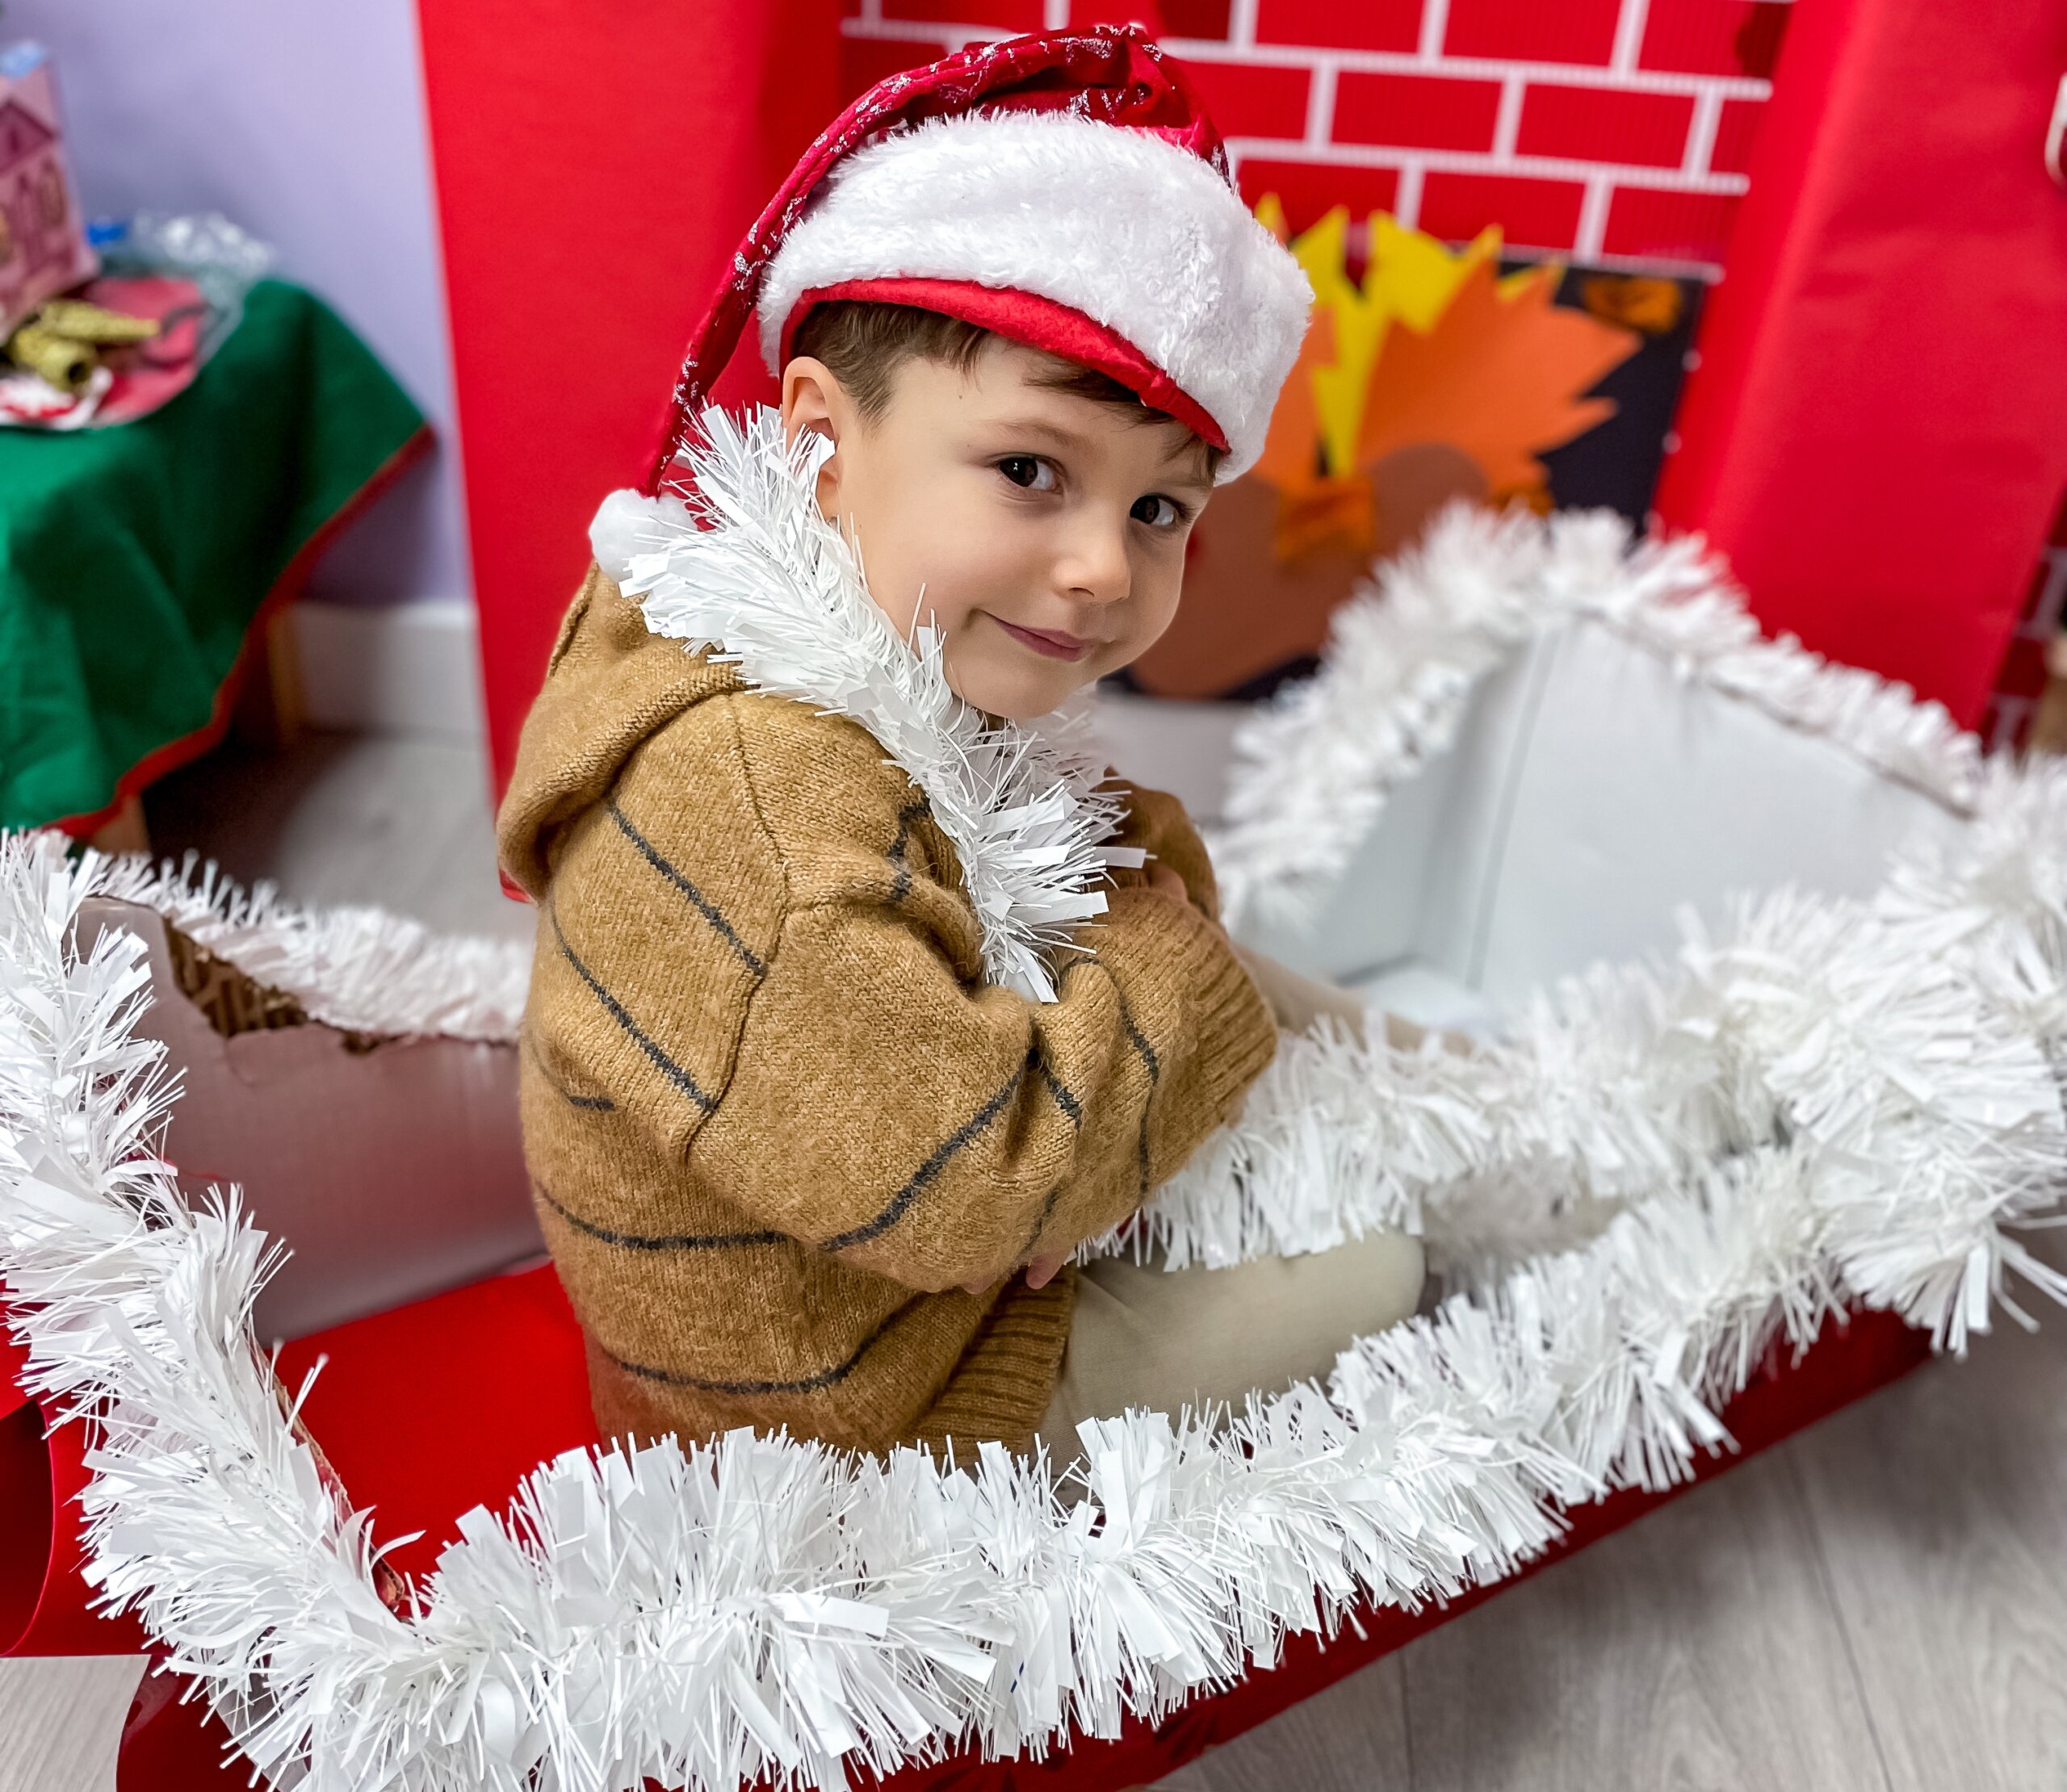 Young boy wearing a Santa hat and a brown sweater, surrounded by white tinsel, sitting in a festive holiday setting with a red background and fireplace decoration